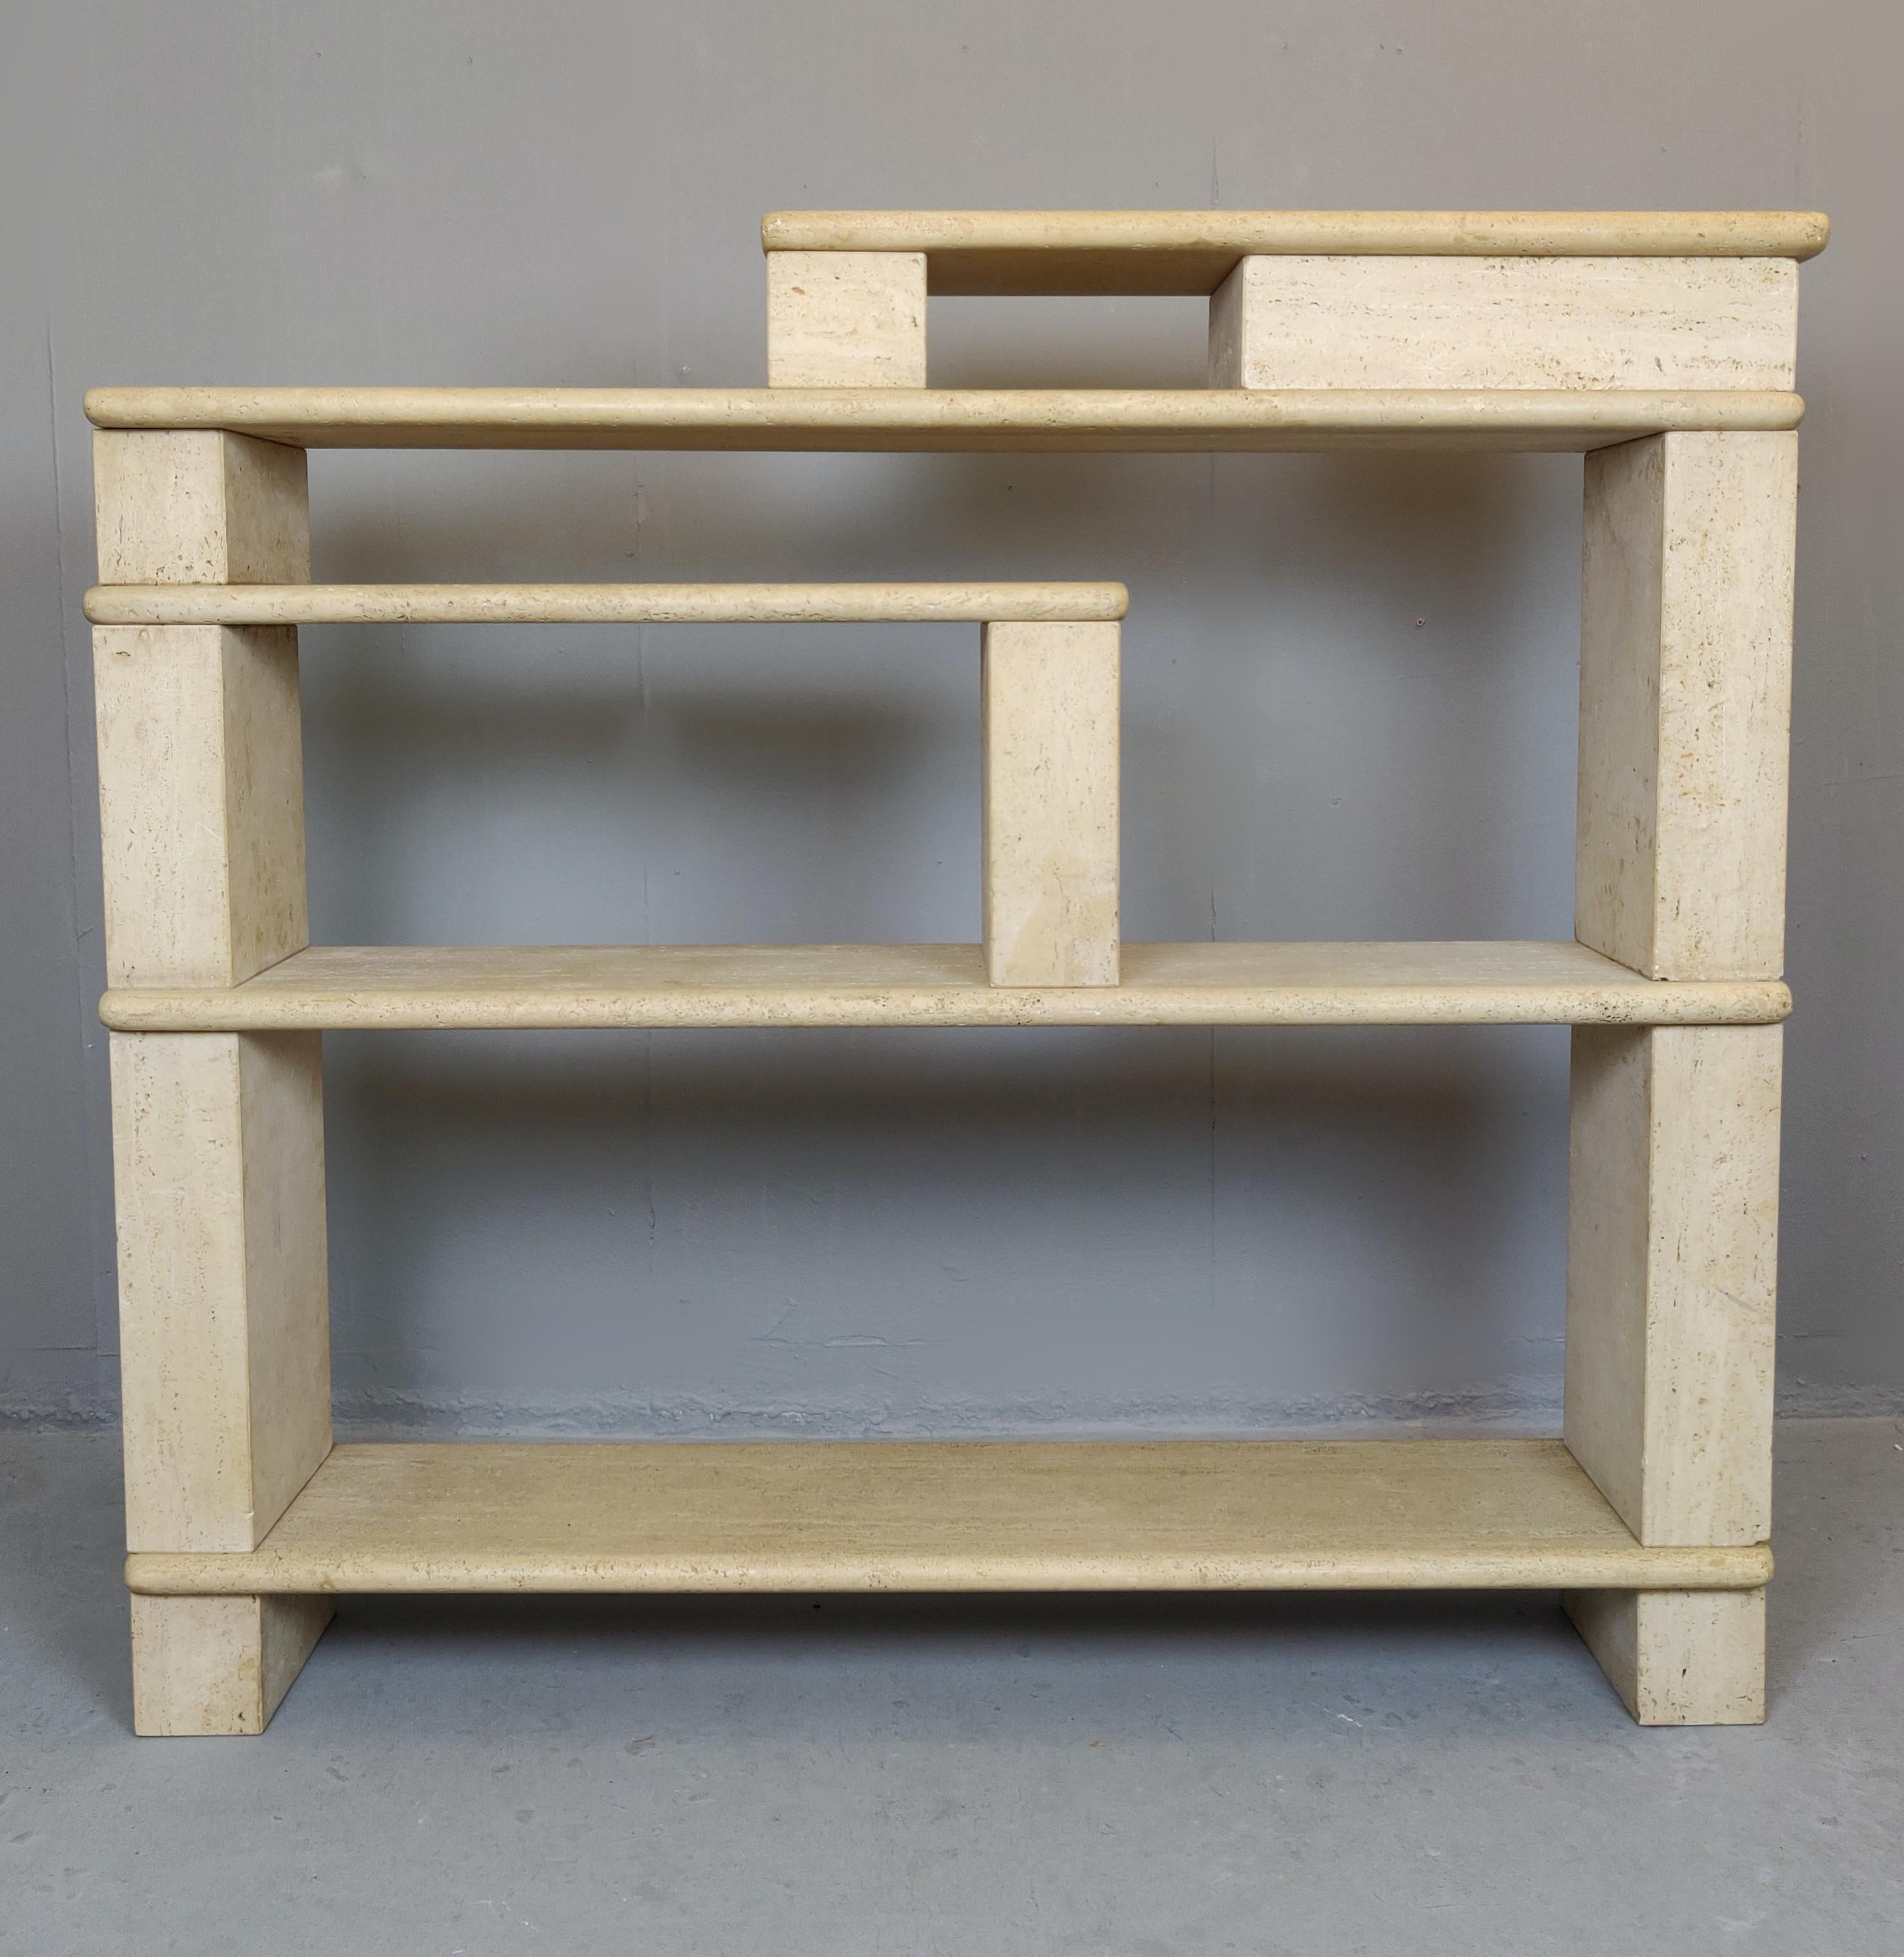 Modular Shelving in Travertine, 1970s In Good Condition For Sale In Brussels, BE